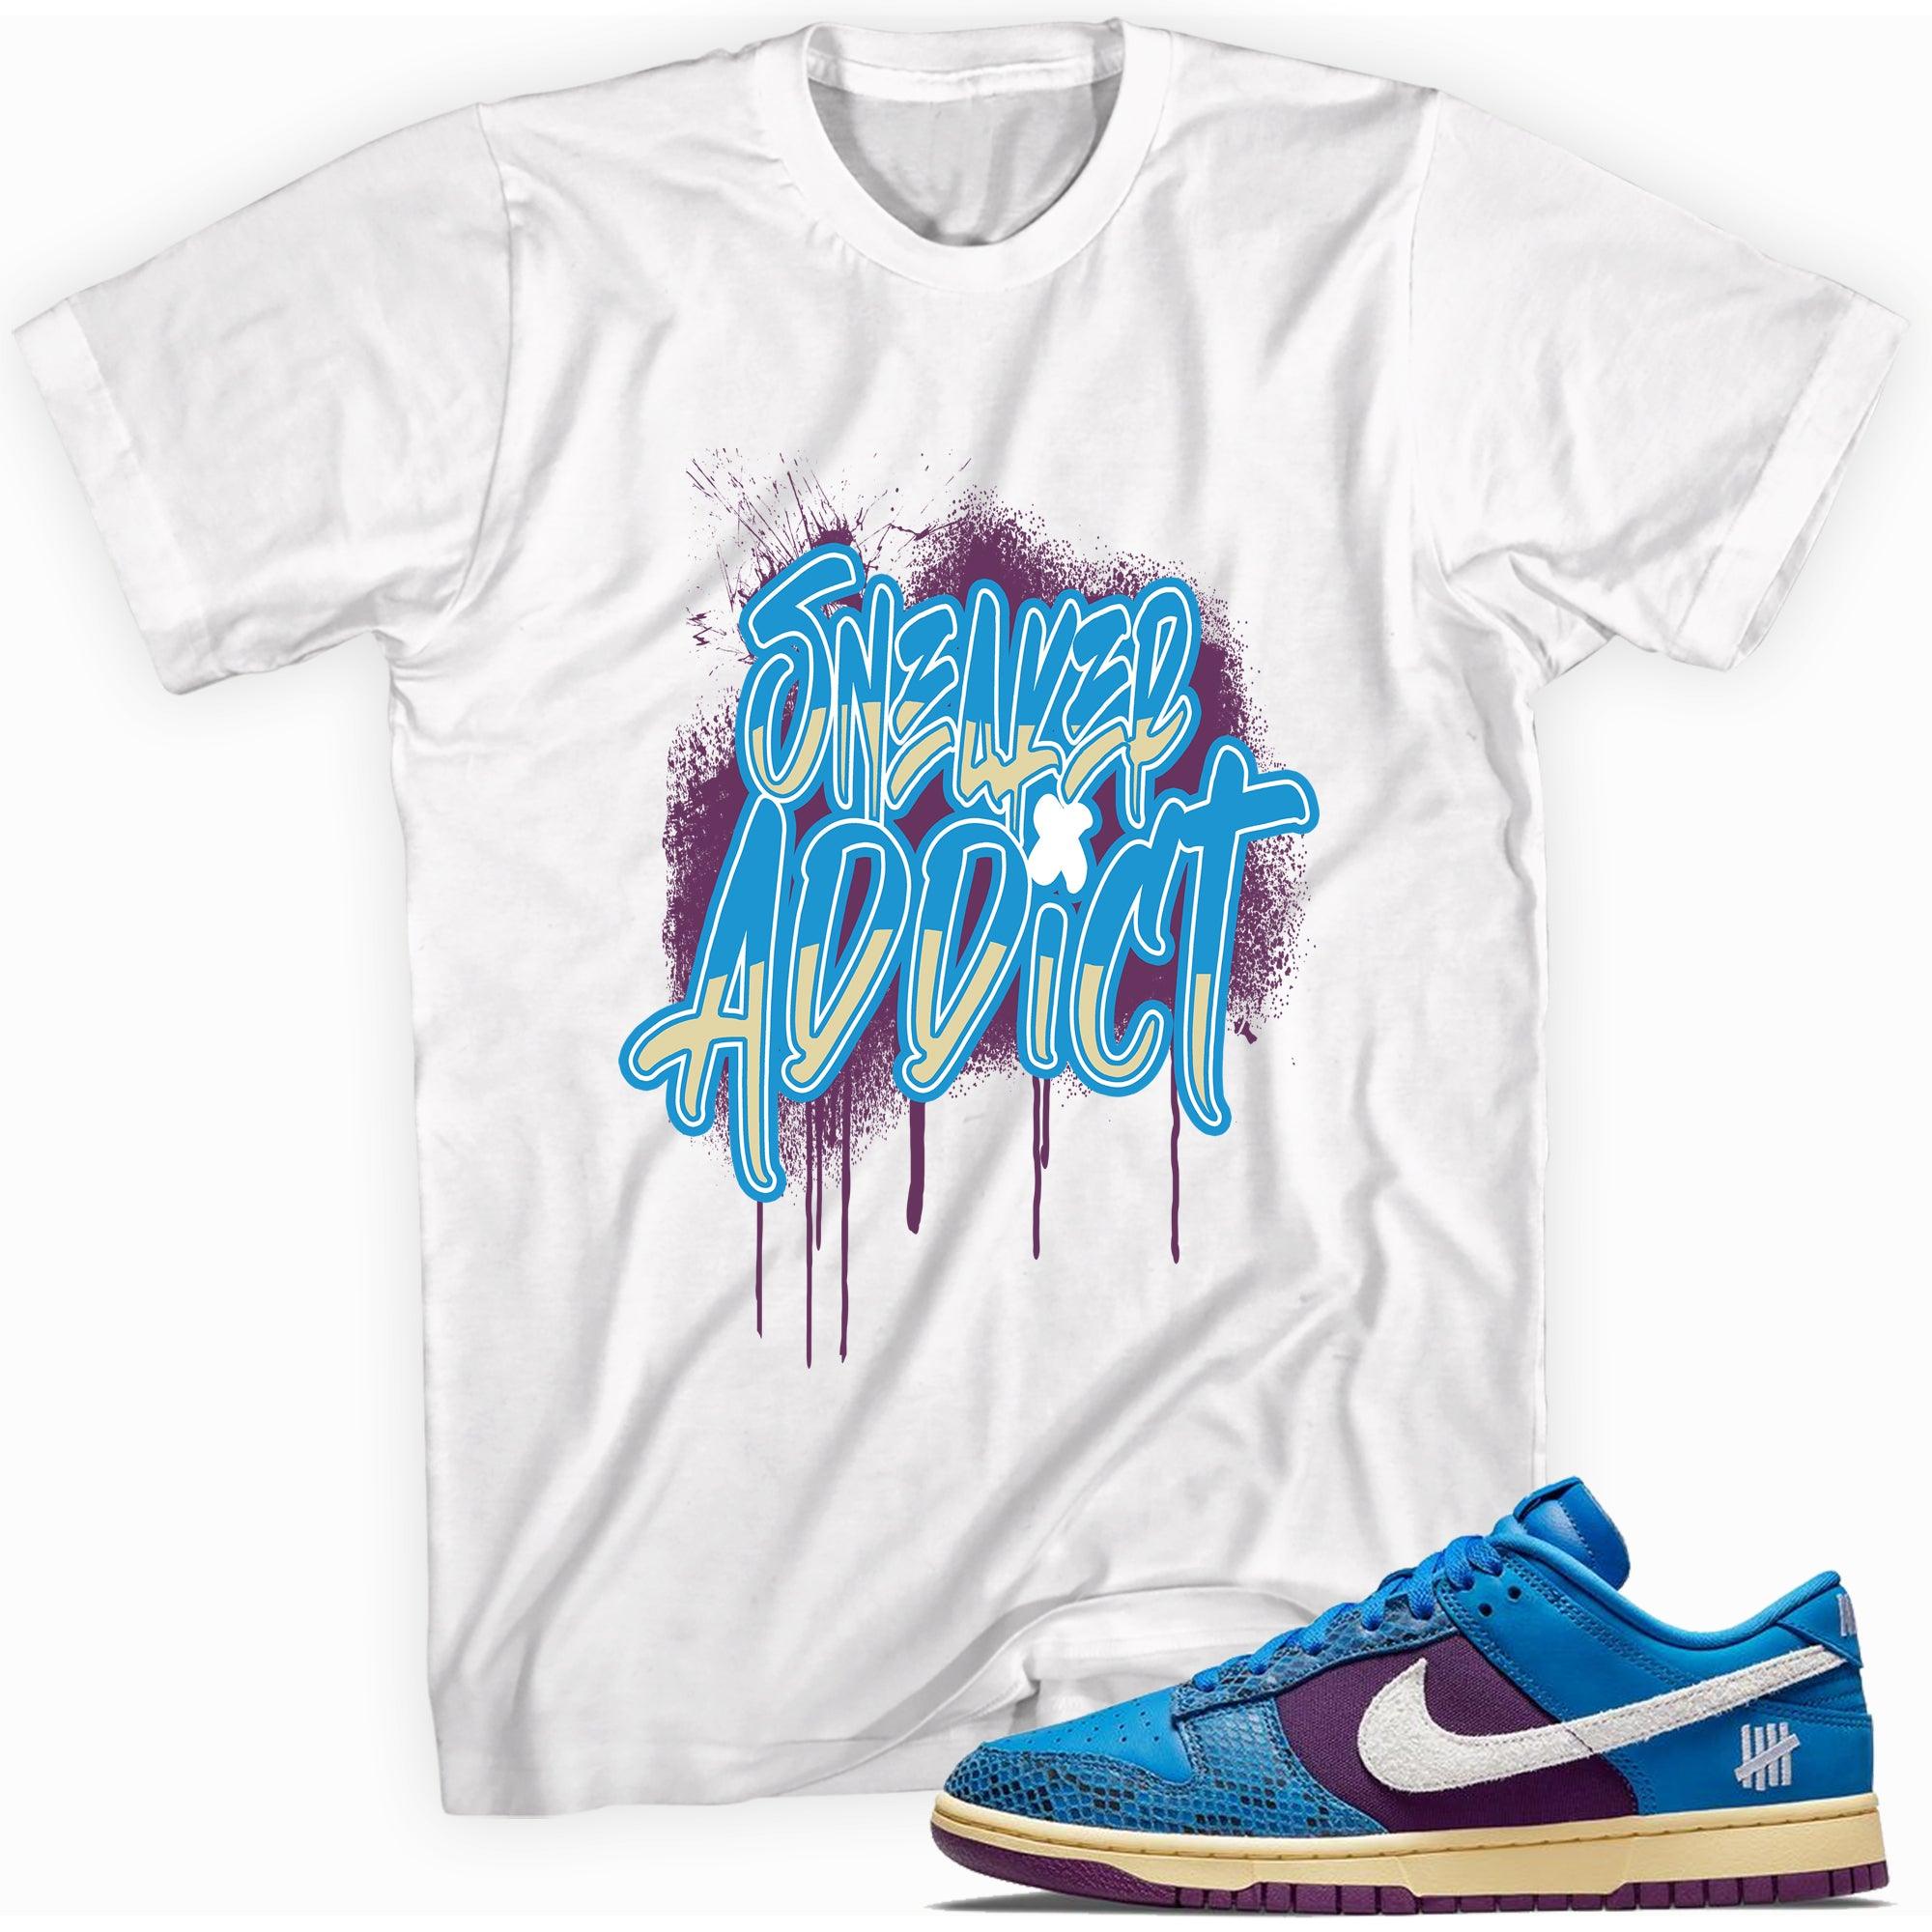 White Sneaker Addict Shirt Nike Dunks Low Undefeated 5 On It Dunk vs AF1 photo